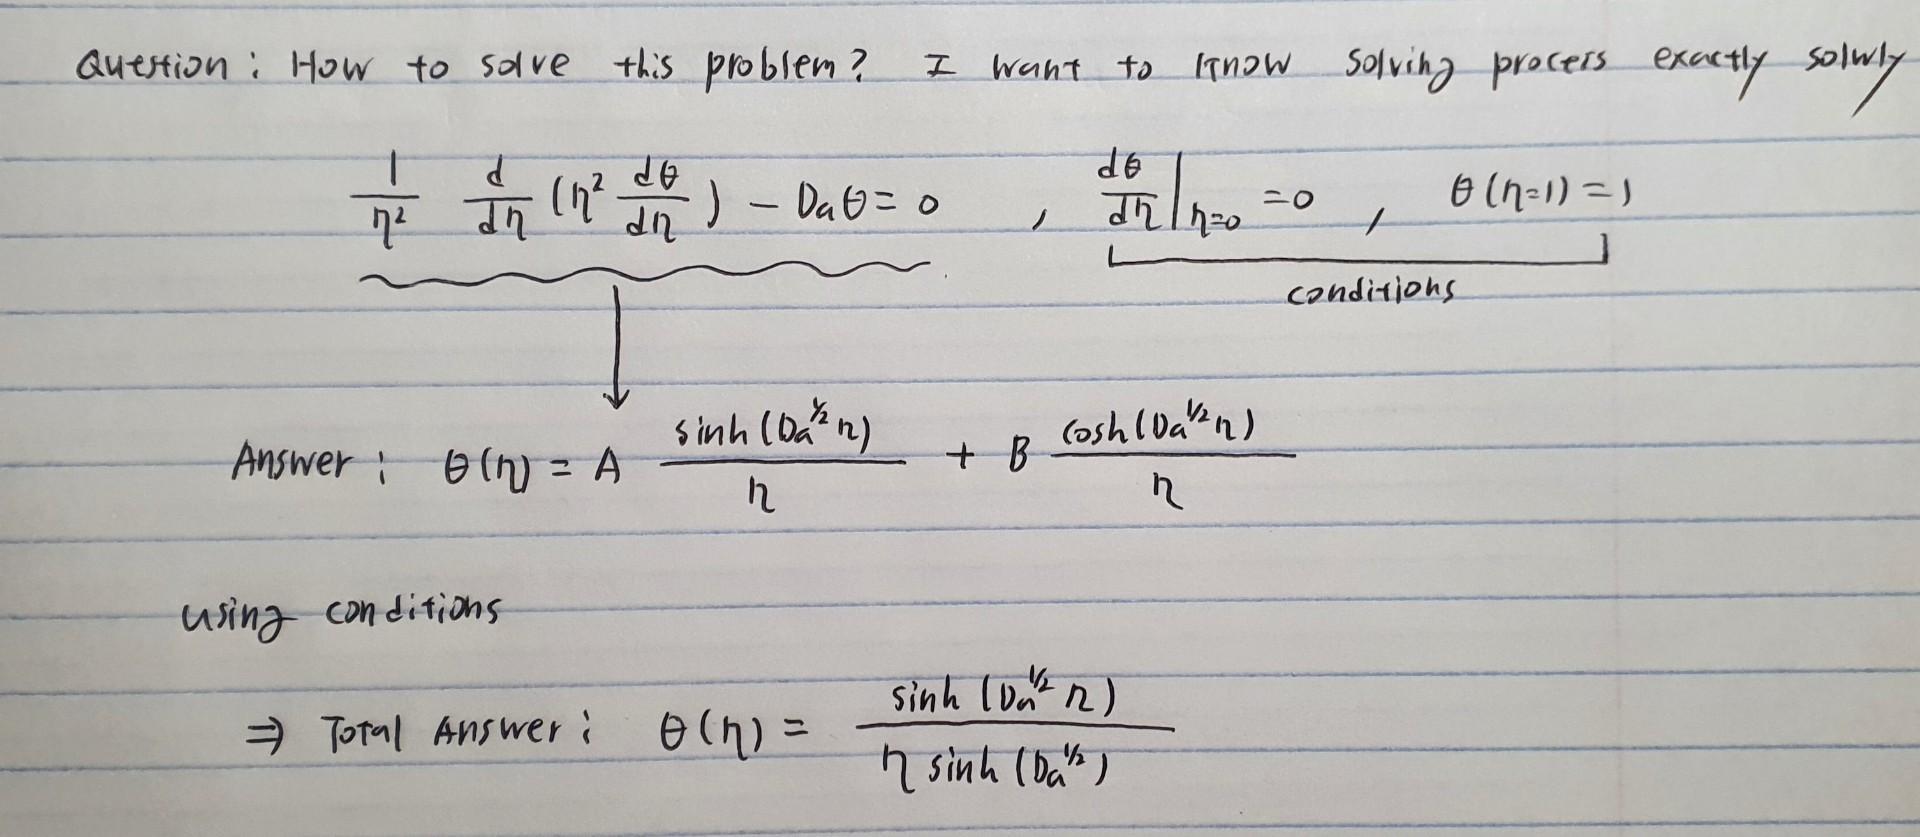 Question: How to solve this problem? | 7 d do In (1 dn ) - Dat= 0 Answer: 0 (n) = A using conditions sinh